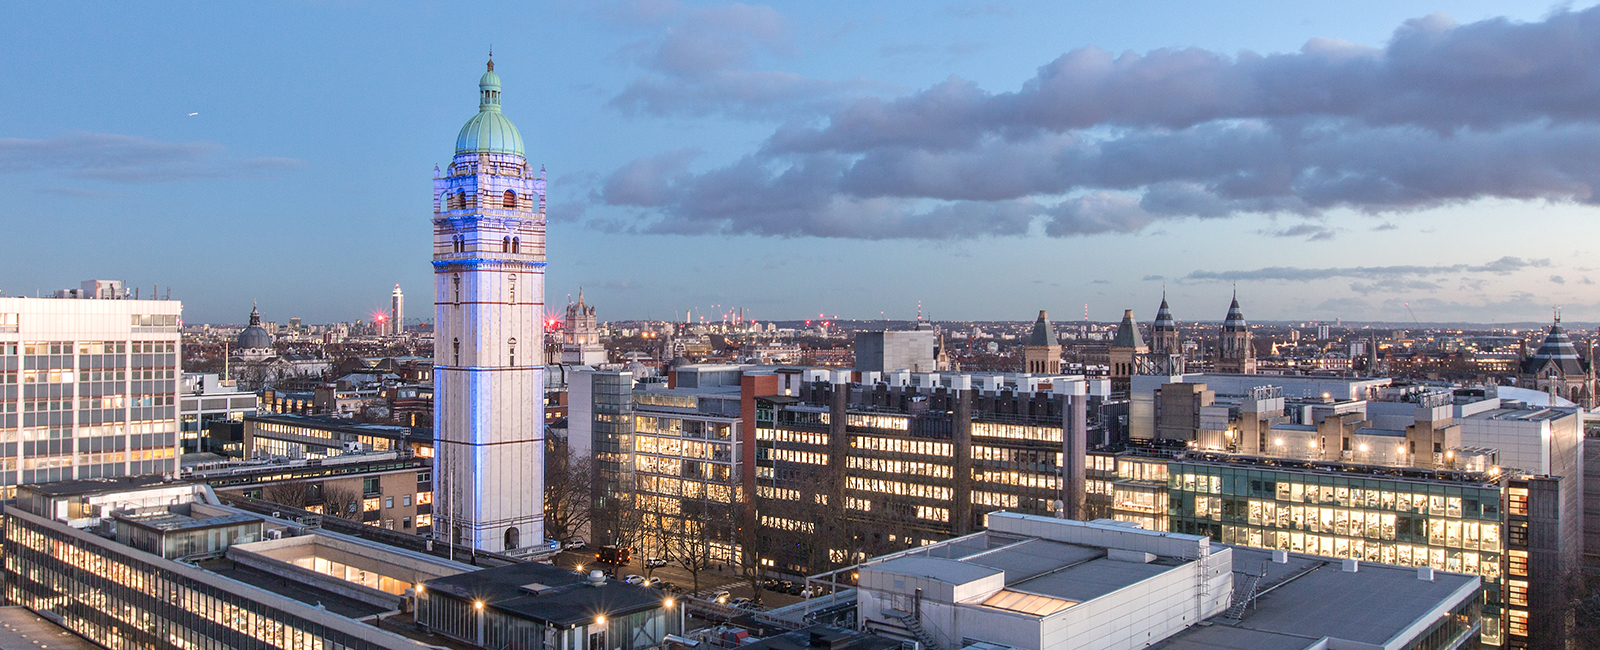 Imperial College London campus birds eye view